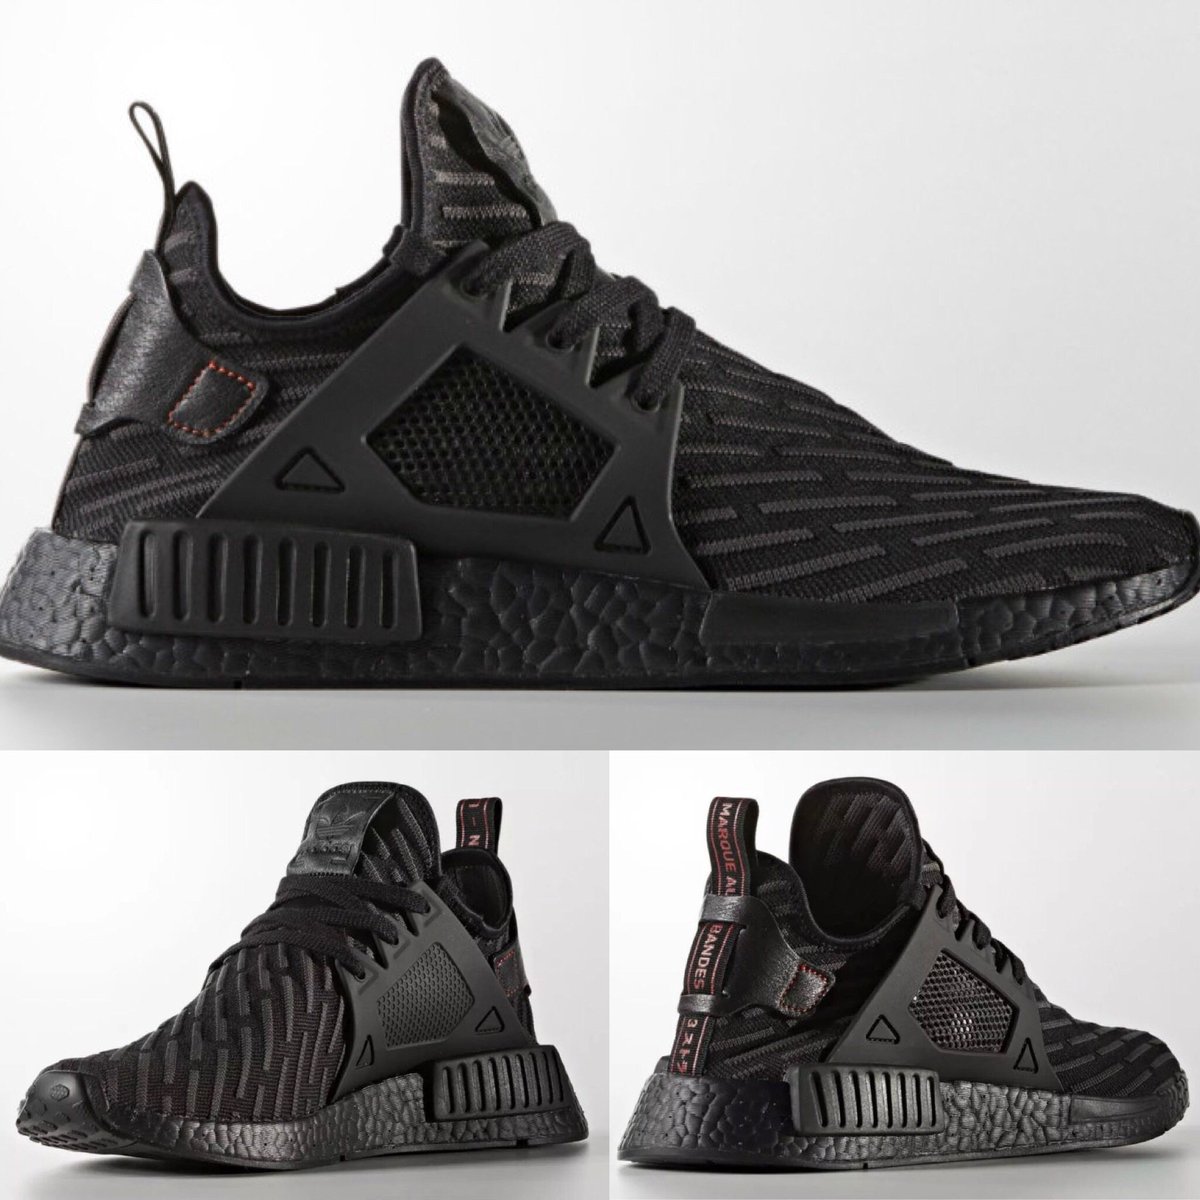 Adidas nmd xr1 core black stockx news explore your world